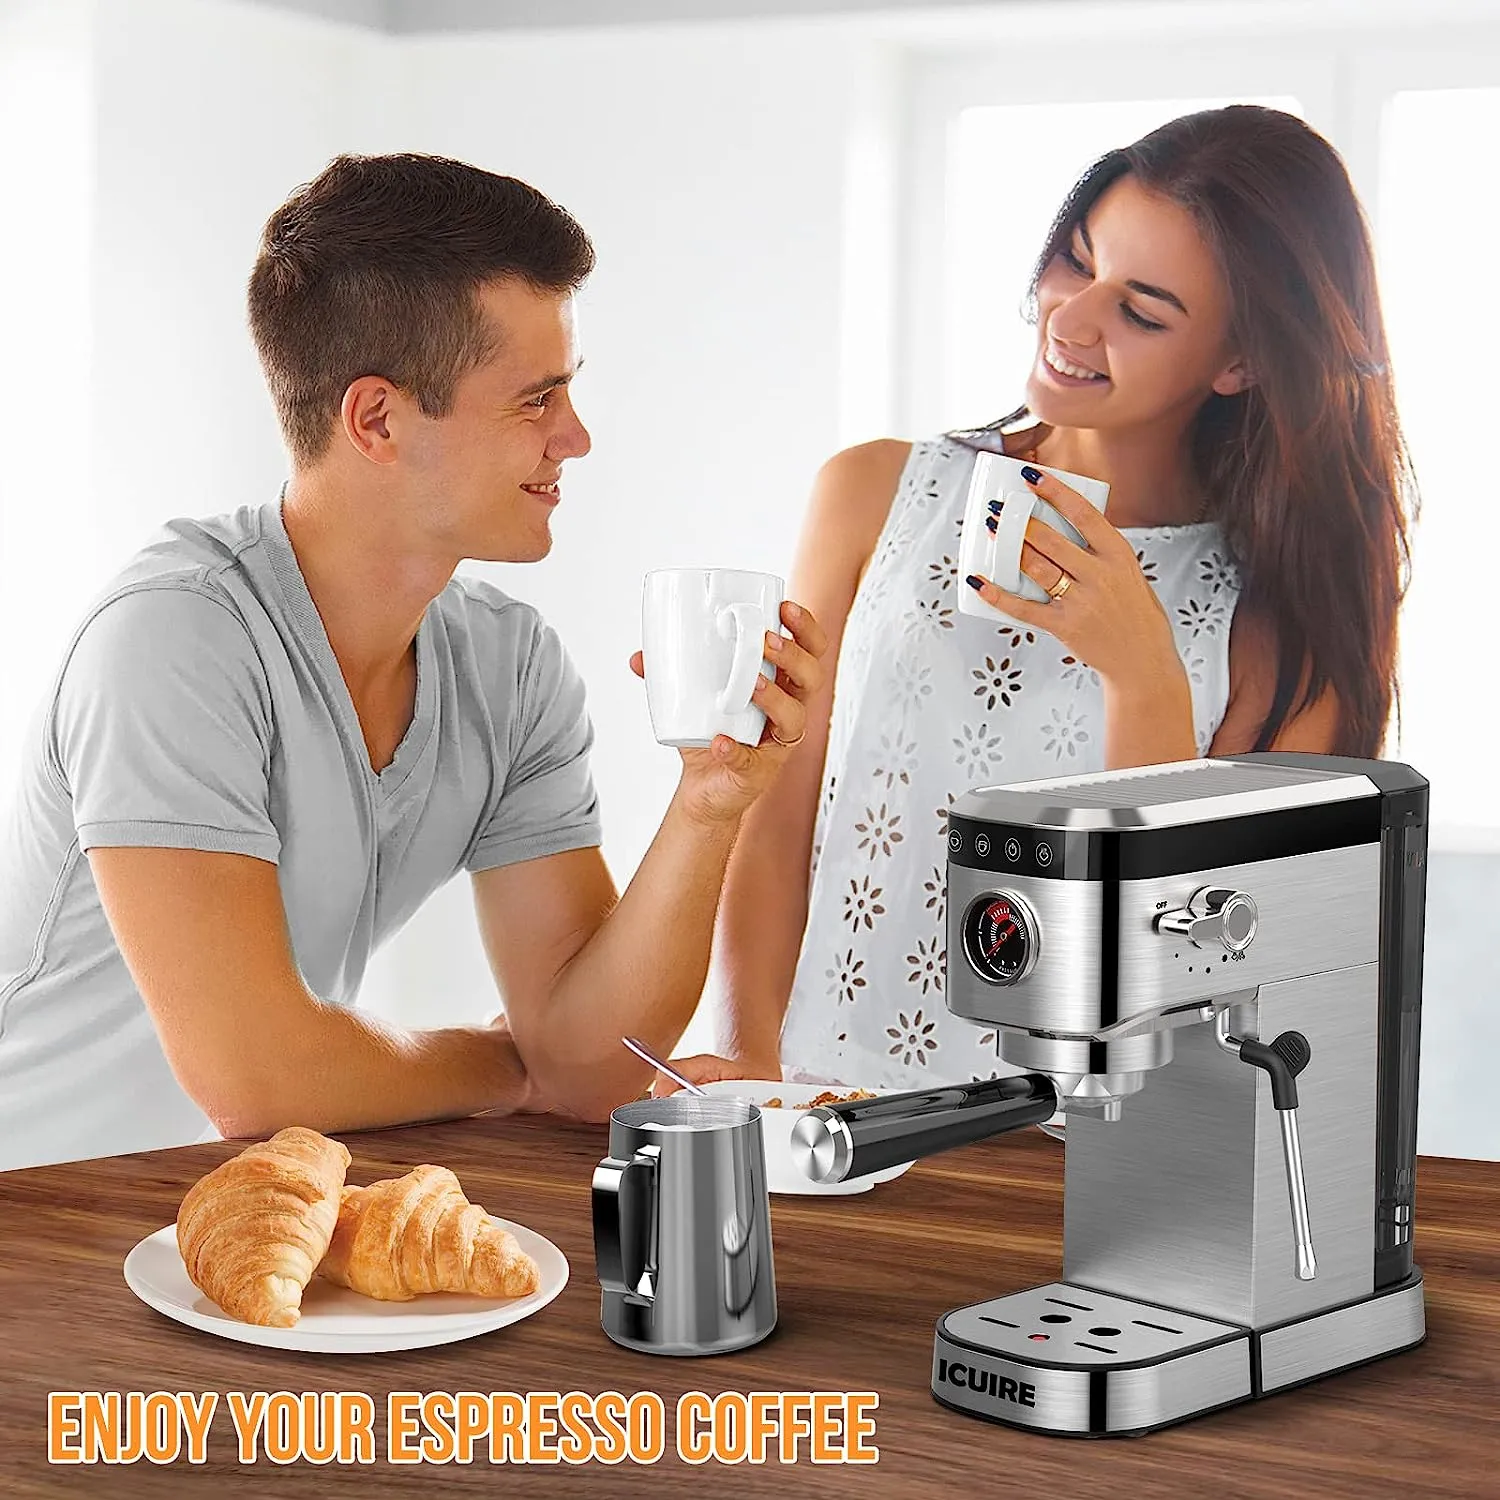 ICUIRE Espresso Machine, 20 Bar Compact Steam Espresso Coffee Machine with Milk Frother, Digital Touch Panel, 37 Oz Removable Water Tank for Espresso Make